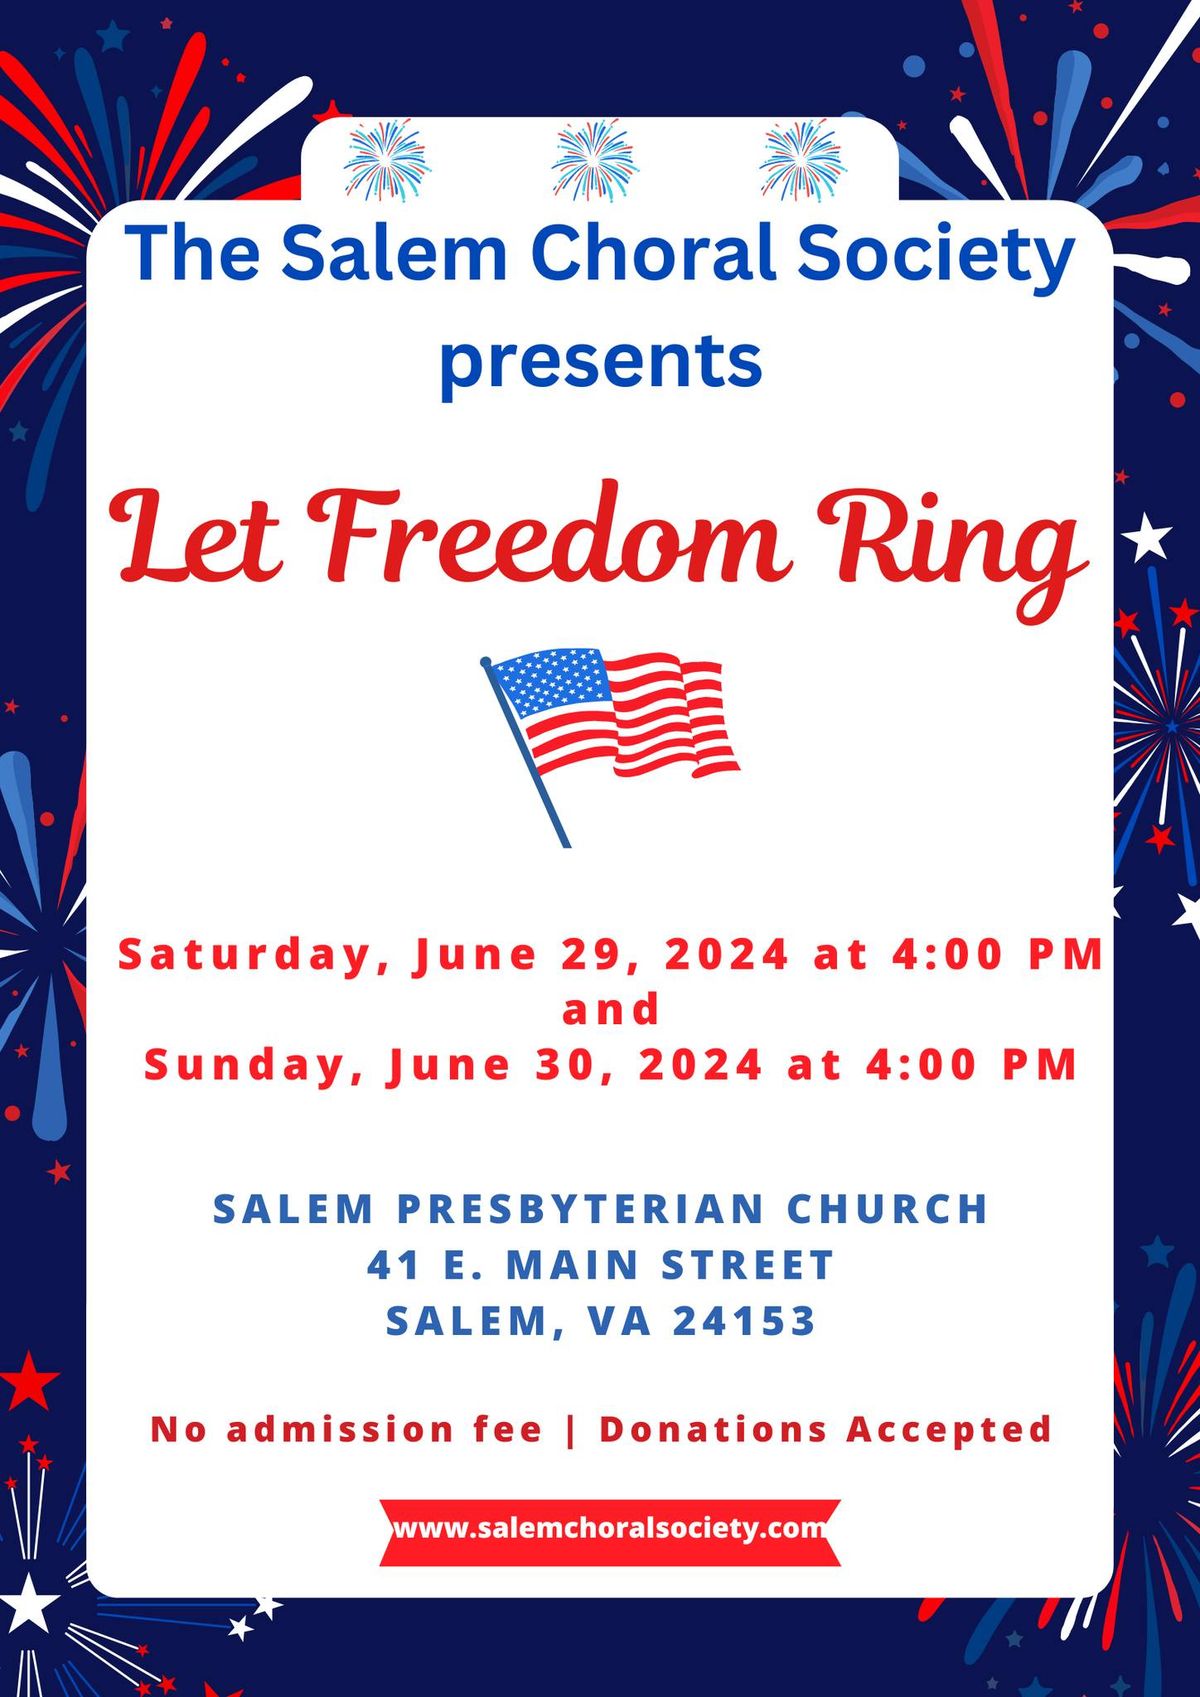 Let Freedom Ring - a Patriotic Concert